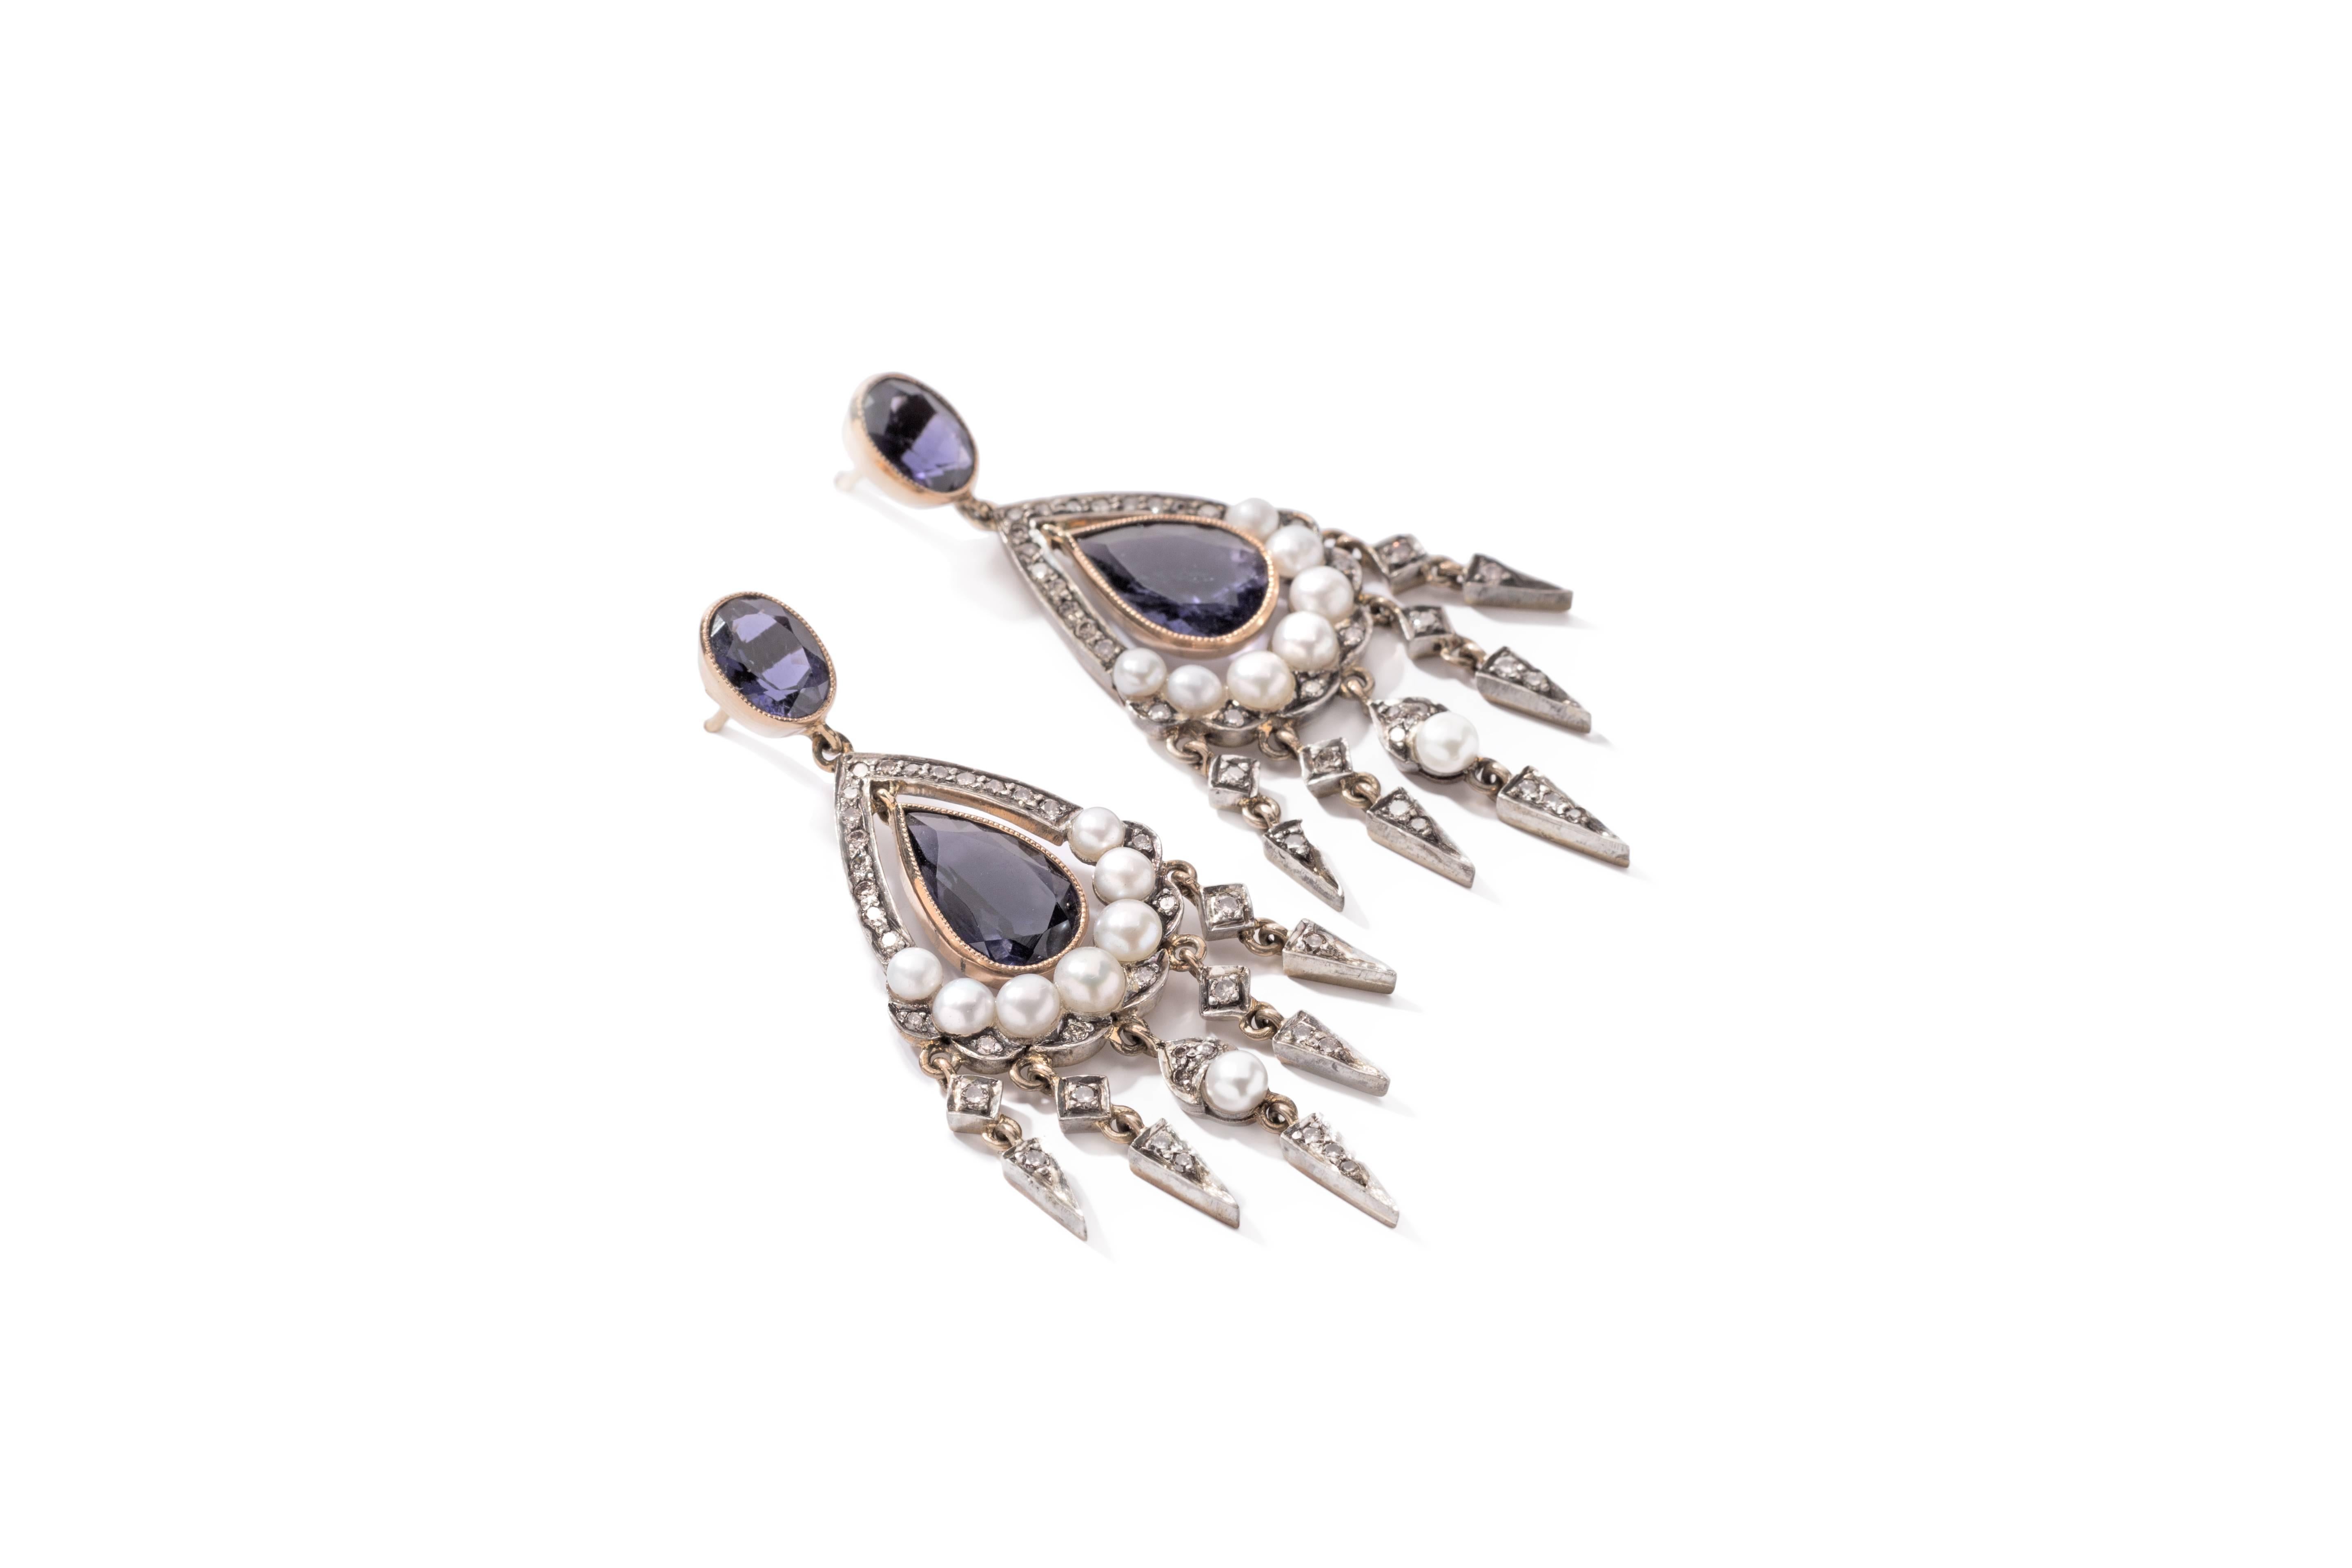 Set with 2 teardrops shape sapphire and 2 oval shape sapphire weighing approximately 6,19cts. 74 brilliant-cut diamonds weighing 0,79cts. and 16 pearls accented. Mounted in 18 carat yellow gold and silver. Weight: 13,46 g.
Length: 2.17 in ( 5,5 cm